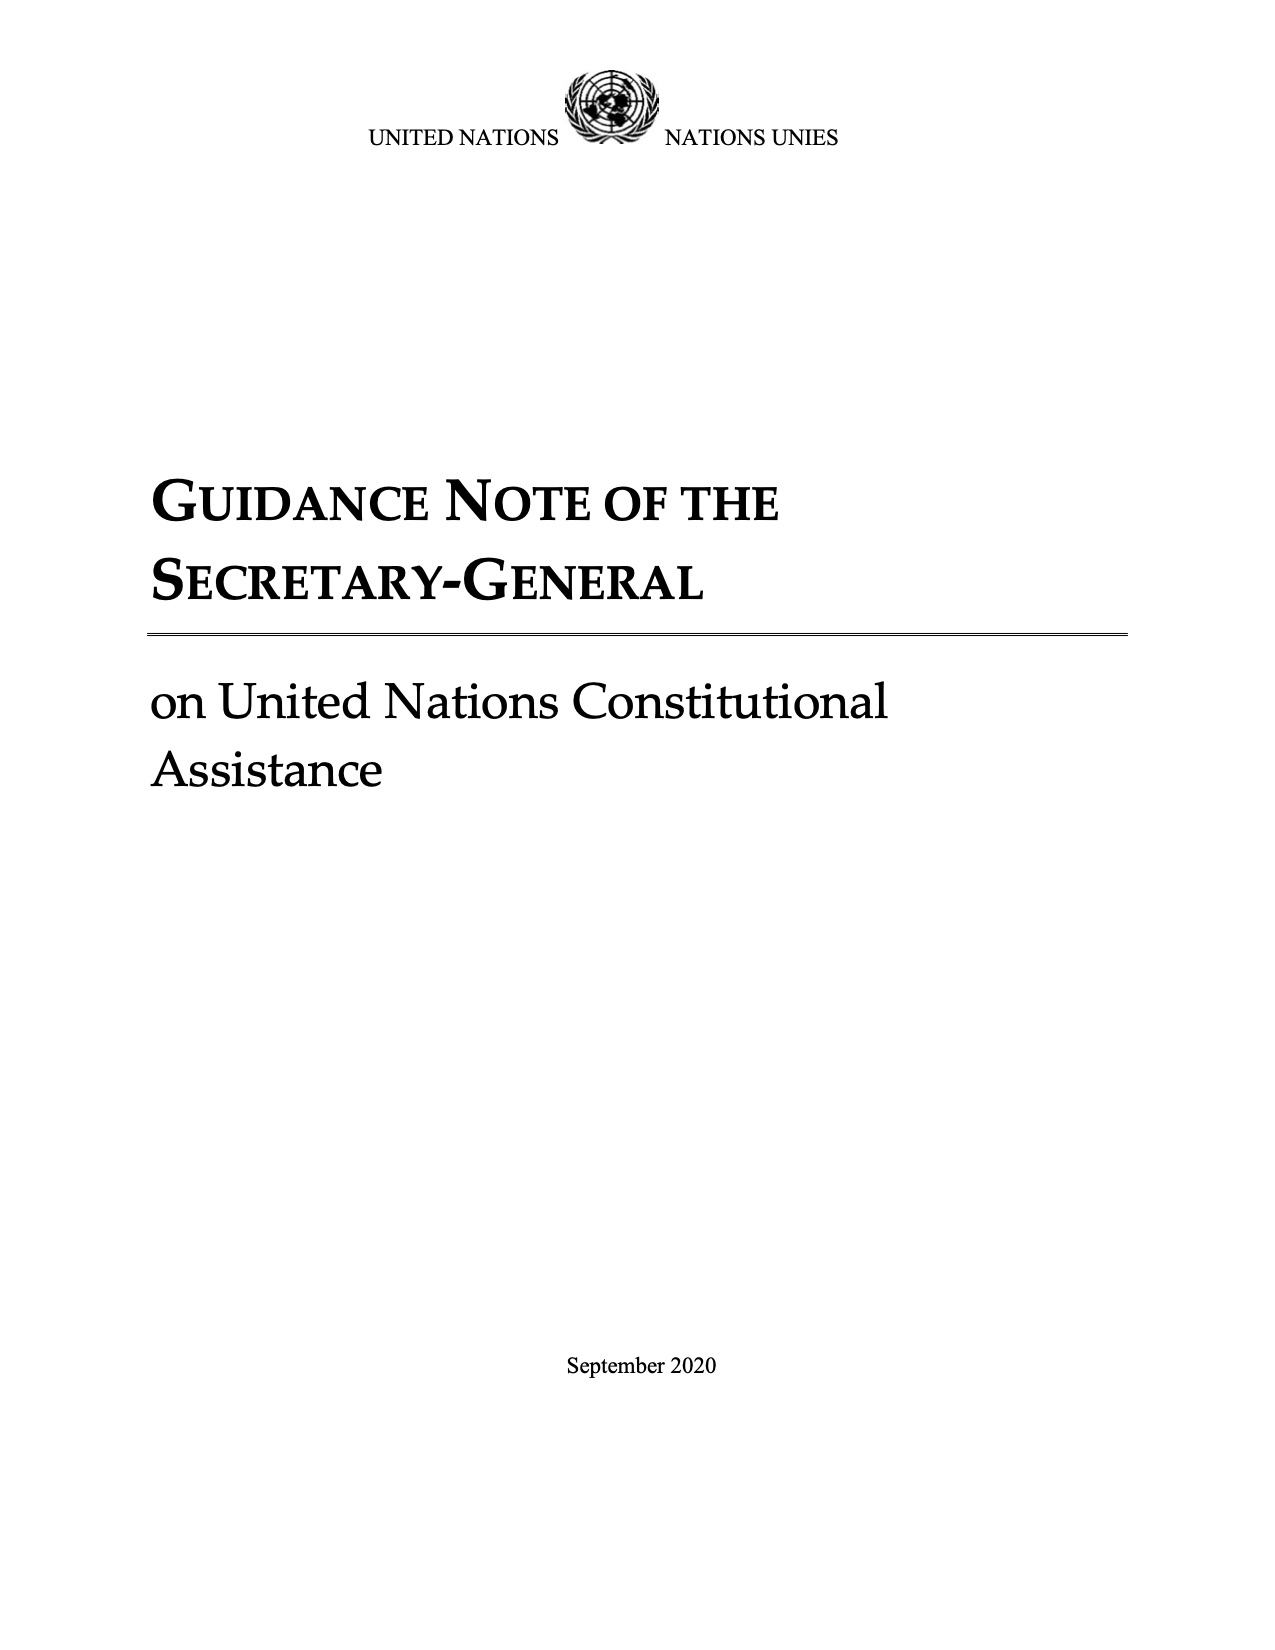 Guidance Note of the Secretary-General on United Nations Constitutional Assistance